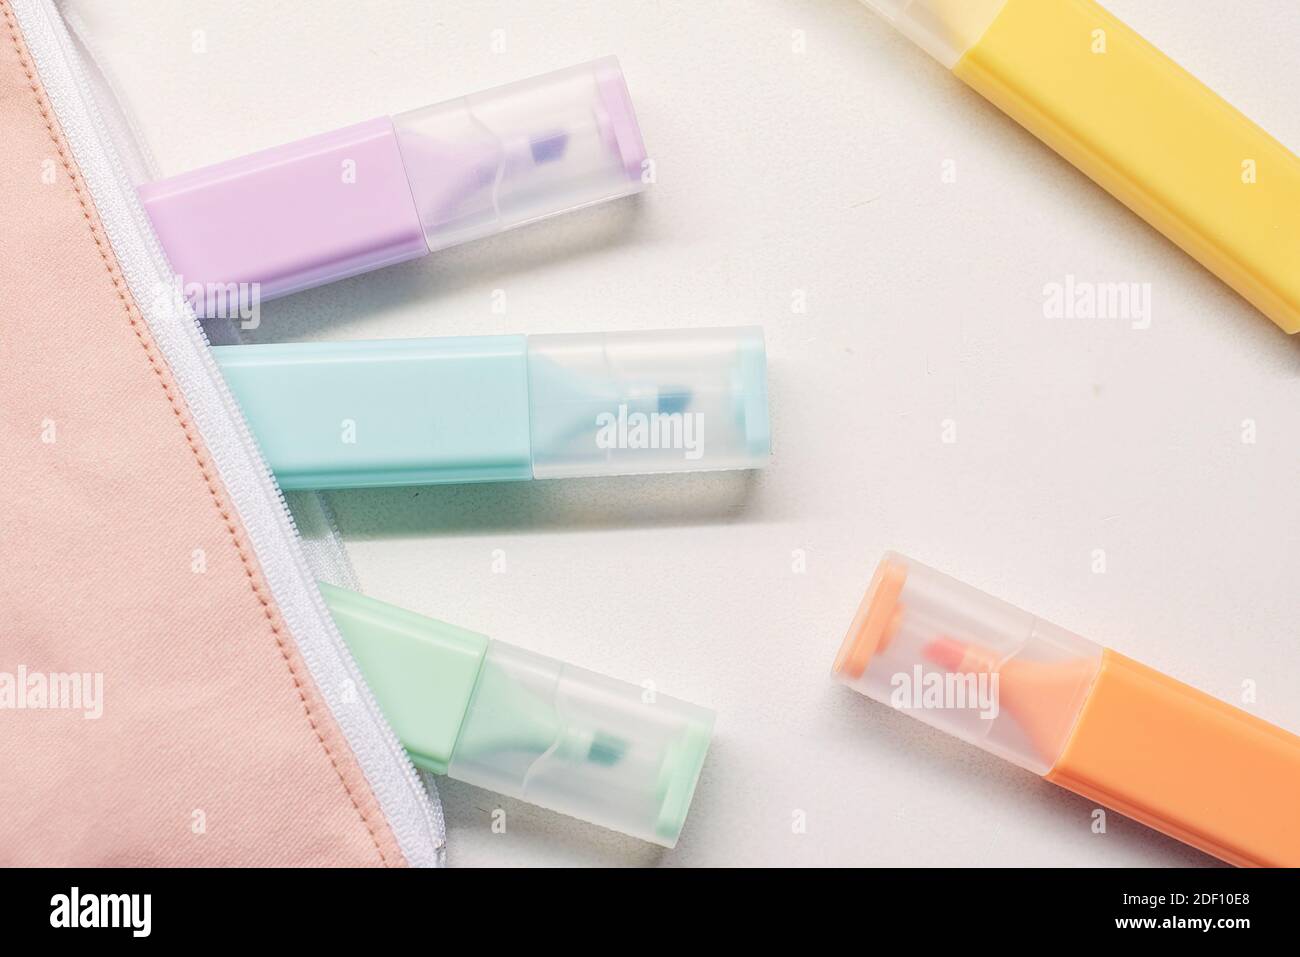 Pastel colored pens and school pencil case on white background Stock Photo